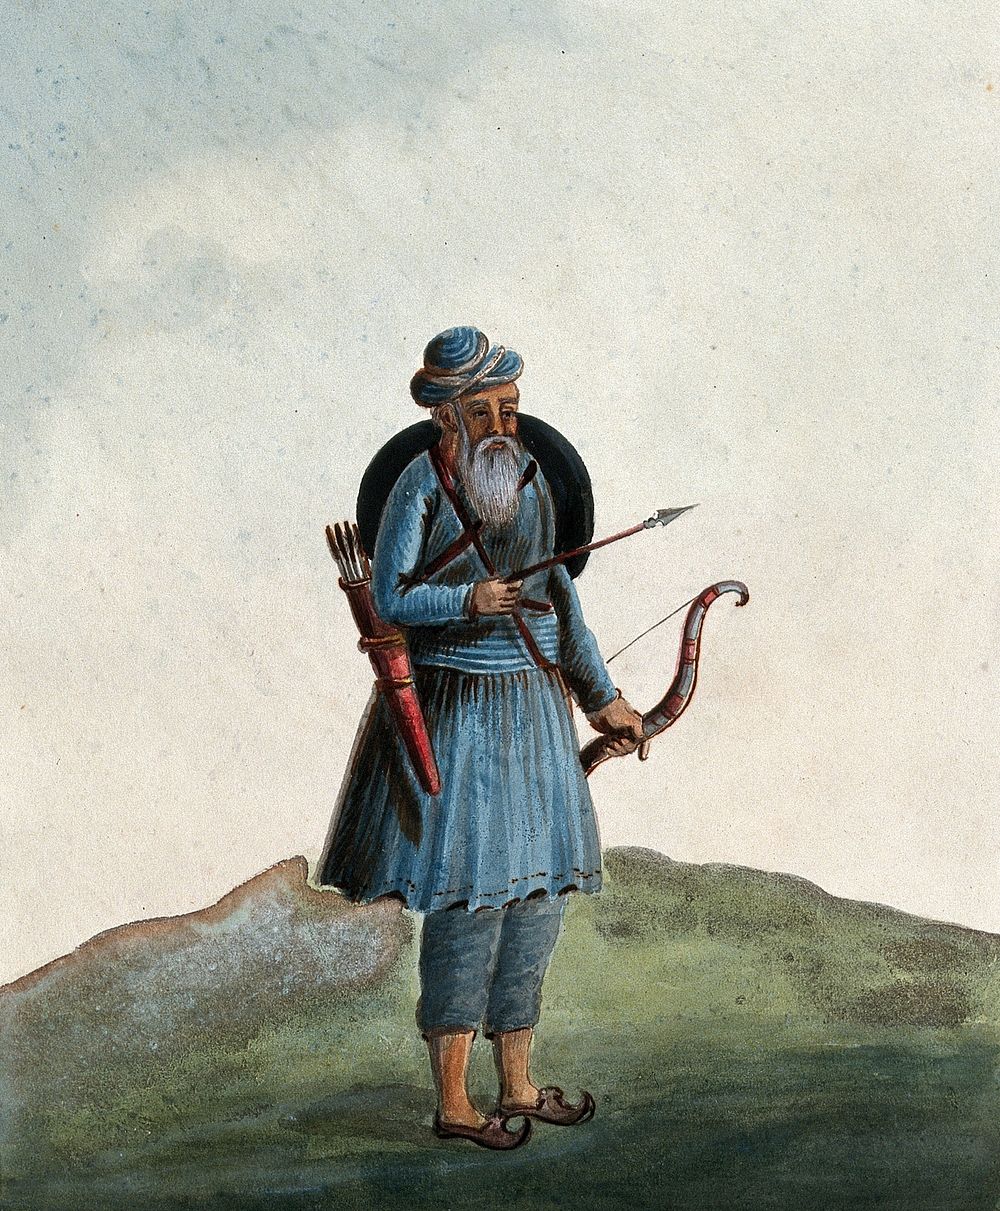 A man carrying a bow and arrow and a shield. Gouache painting by an Indian artist.